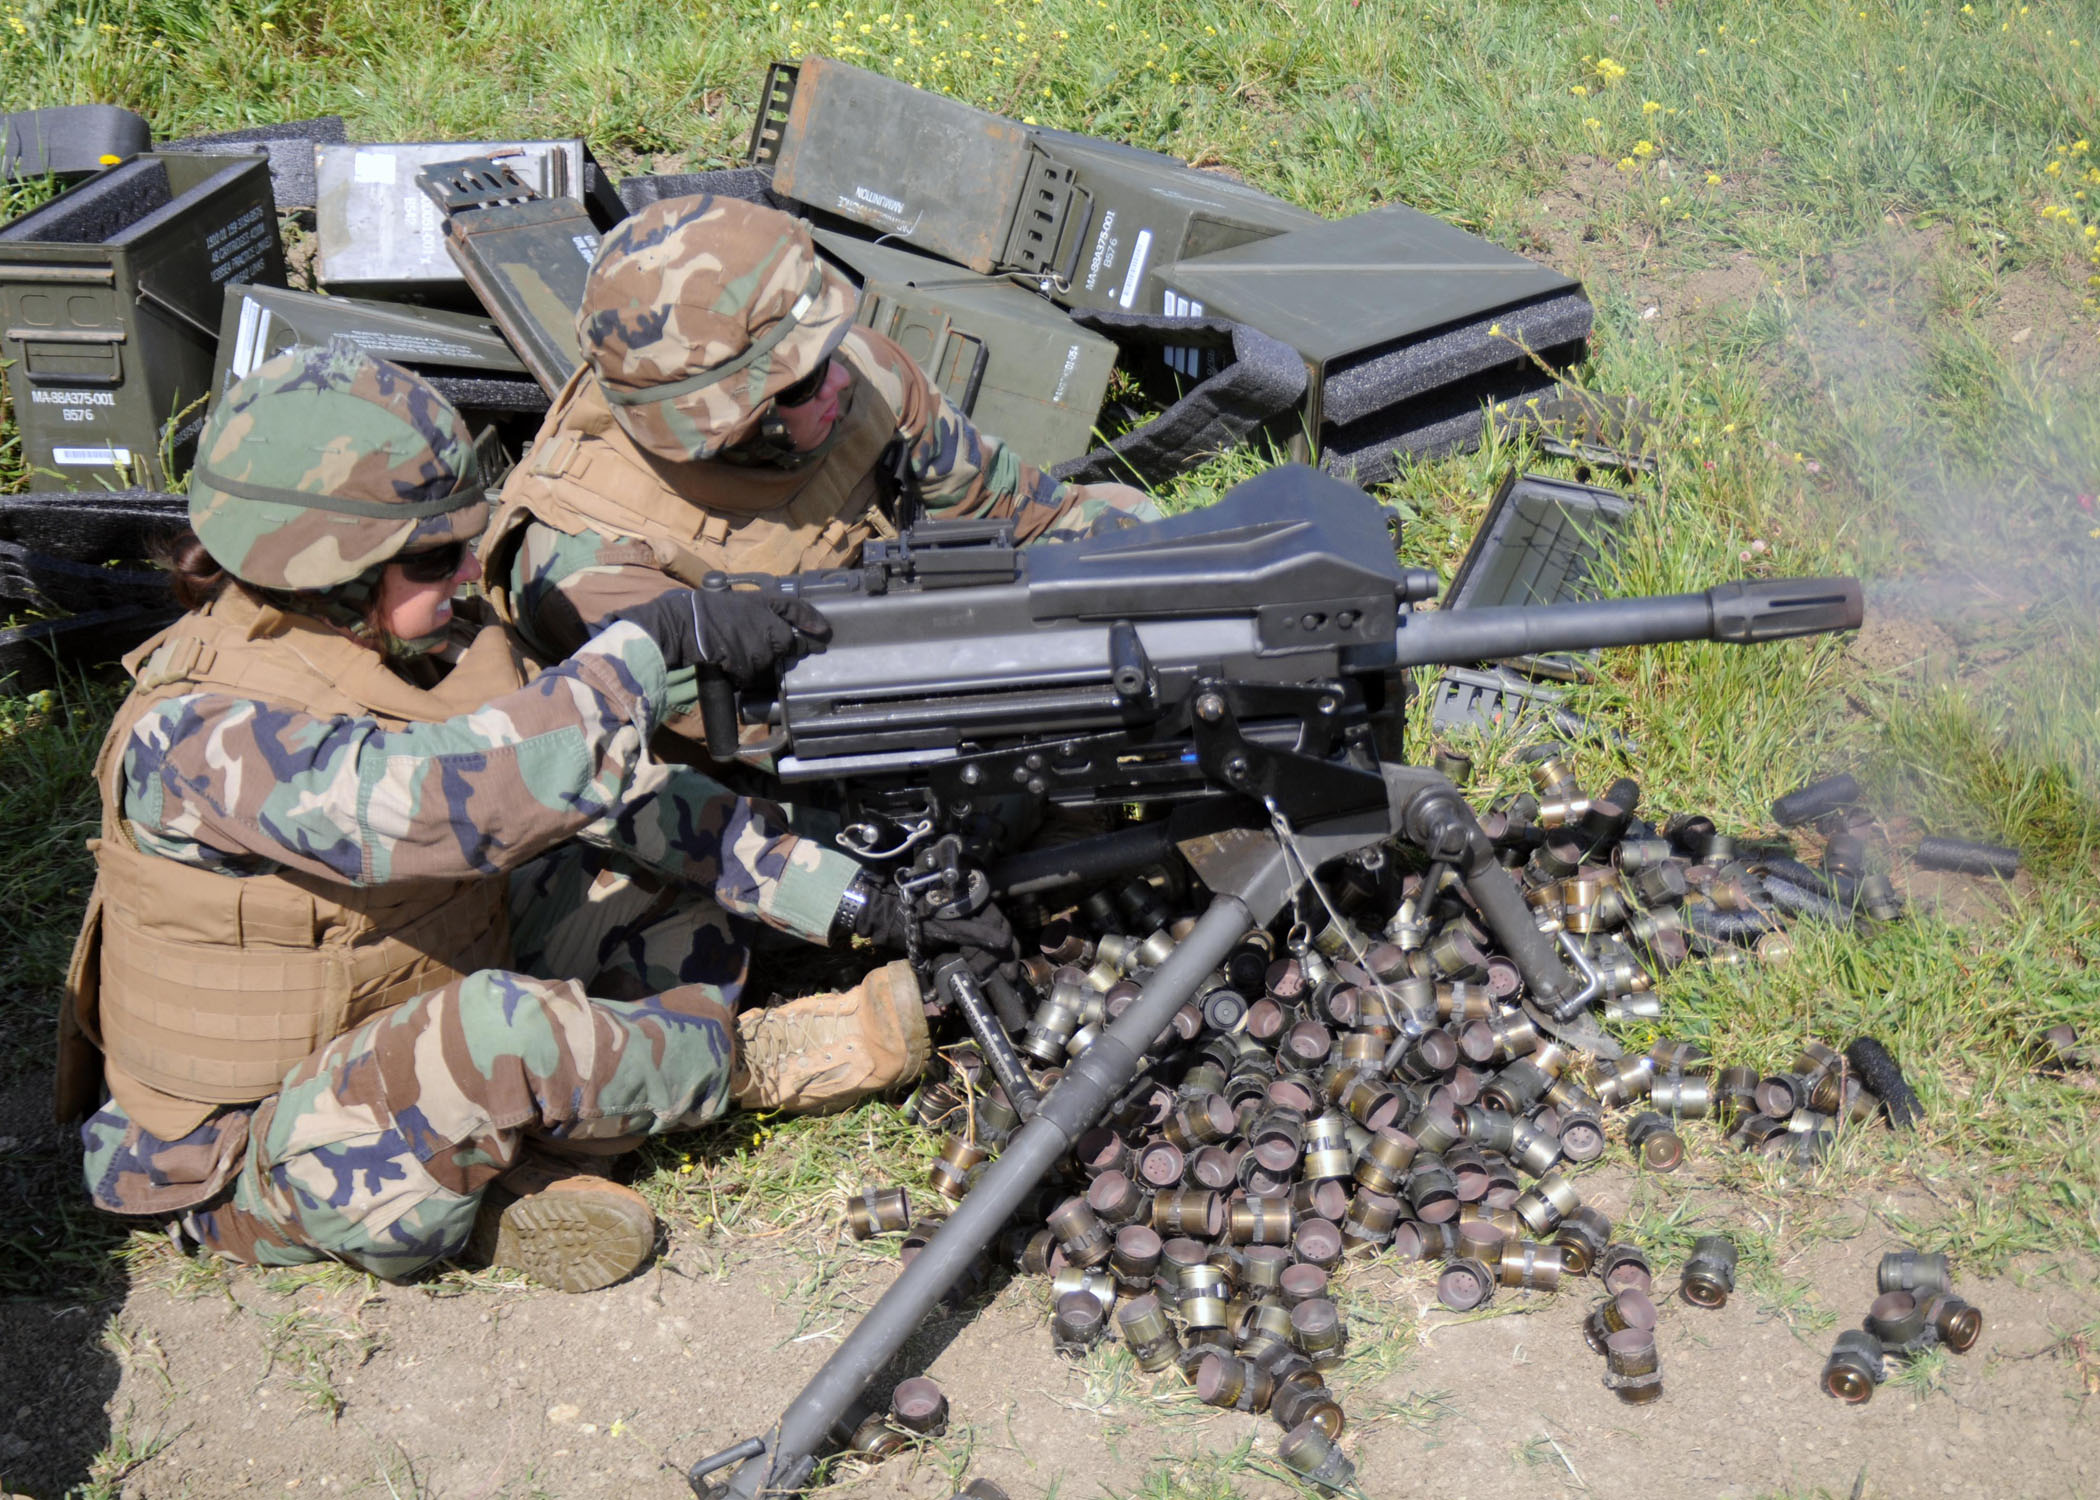 Flickr_-_Official_U.S._Navy_Imagery_-_Seabee_fires_MK-19_grenade_launcher_during_training..jpg